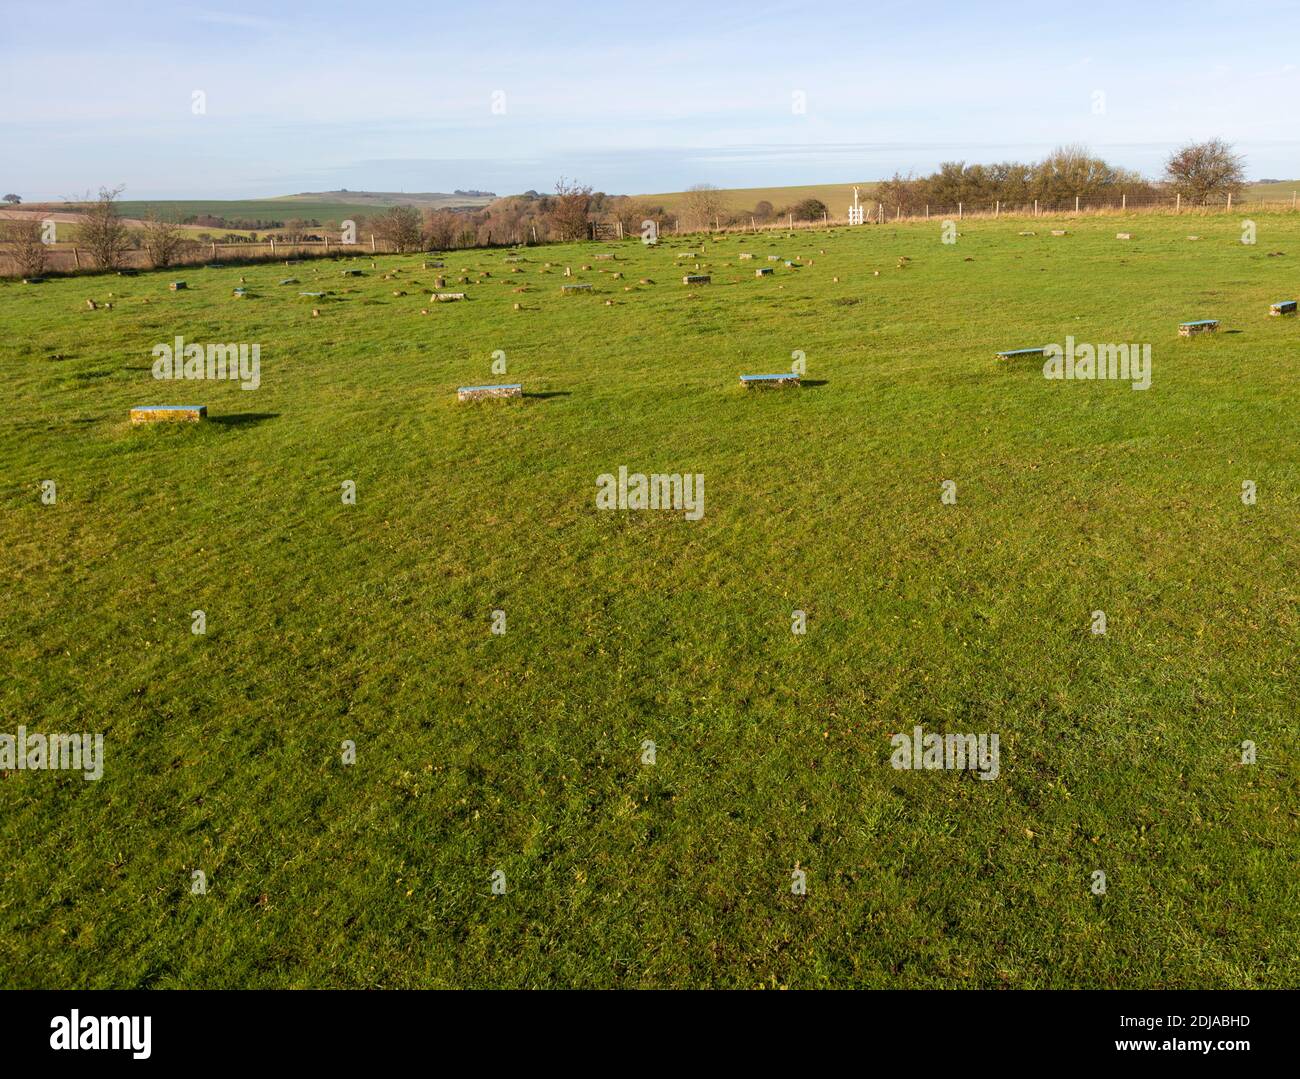 Concrete post markers at neolithic The Sanctuary prehistoric site, Overton Hill, Wiltshire, England, UK Stock Photo